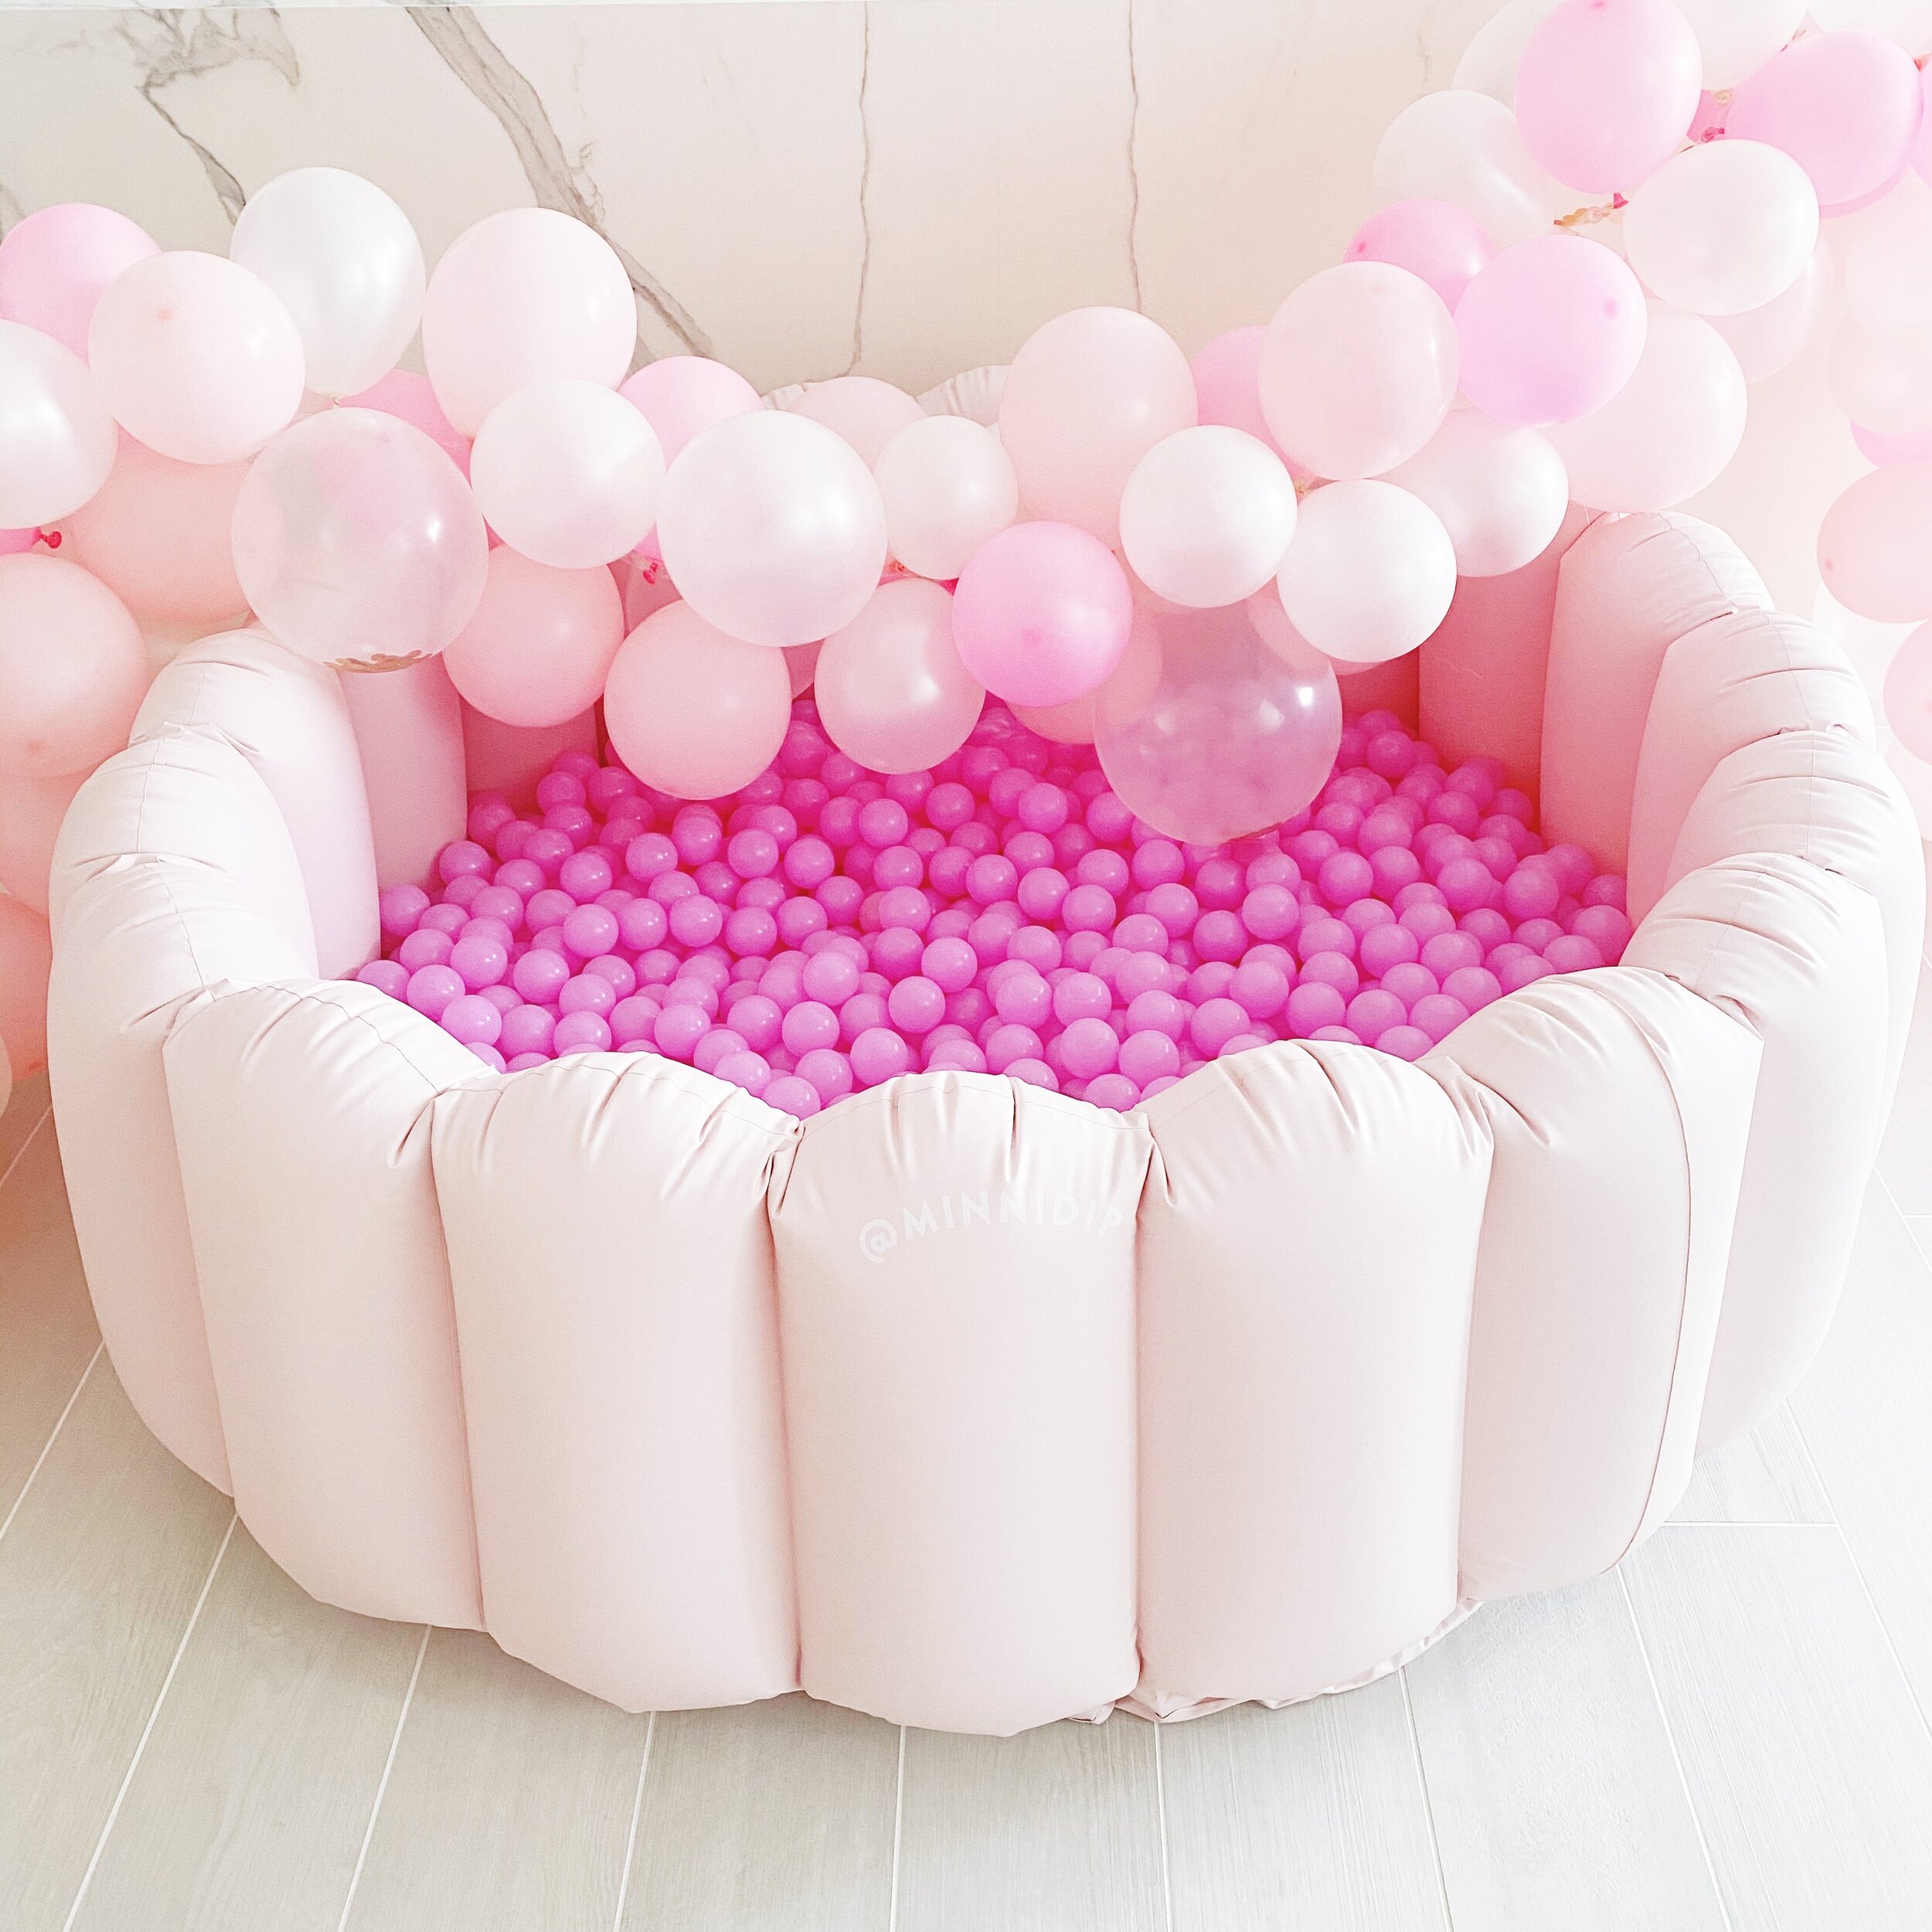 The-Caroline-Doll-Birthday-Pink-Ball-Pit-Minnidip-Inflatable-Pool-Luxury-Office-Goals-Party-Lifestyle-2.JPG